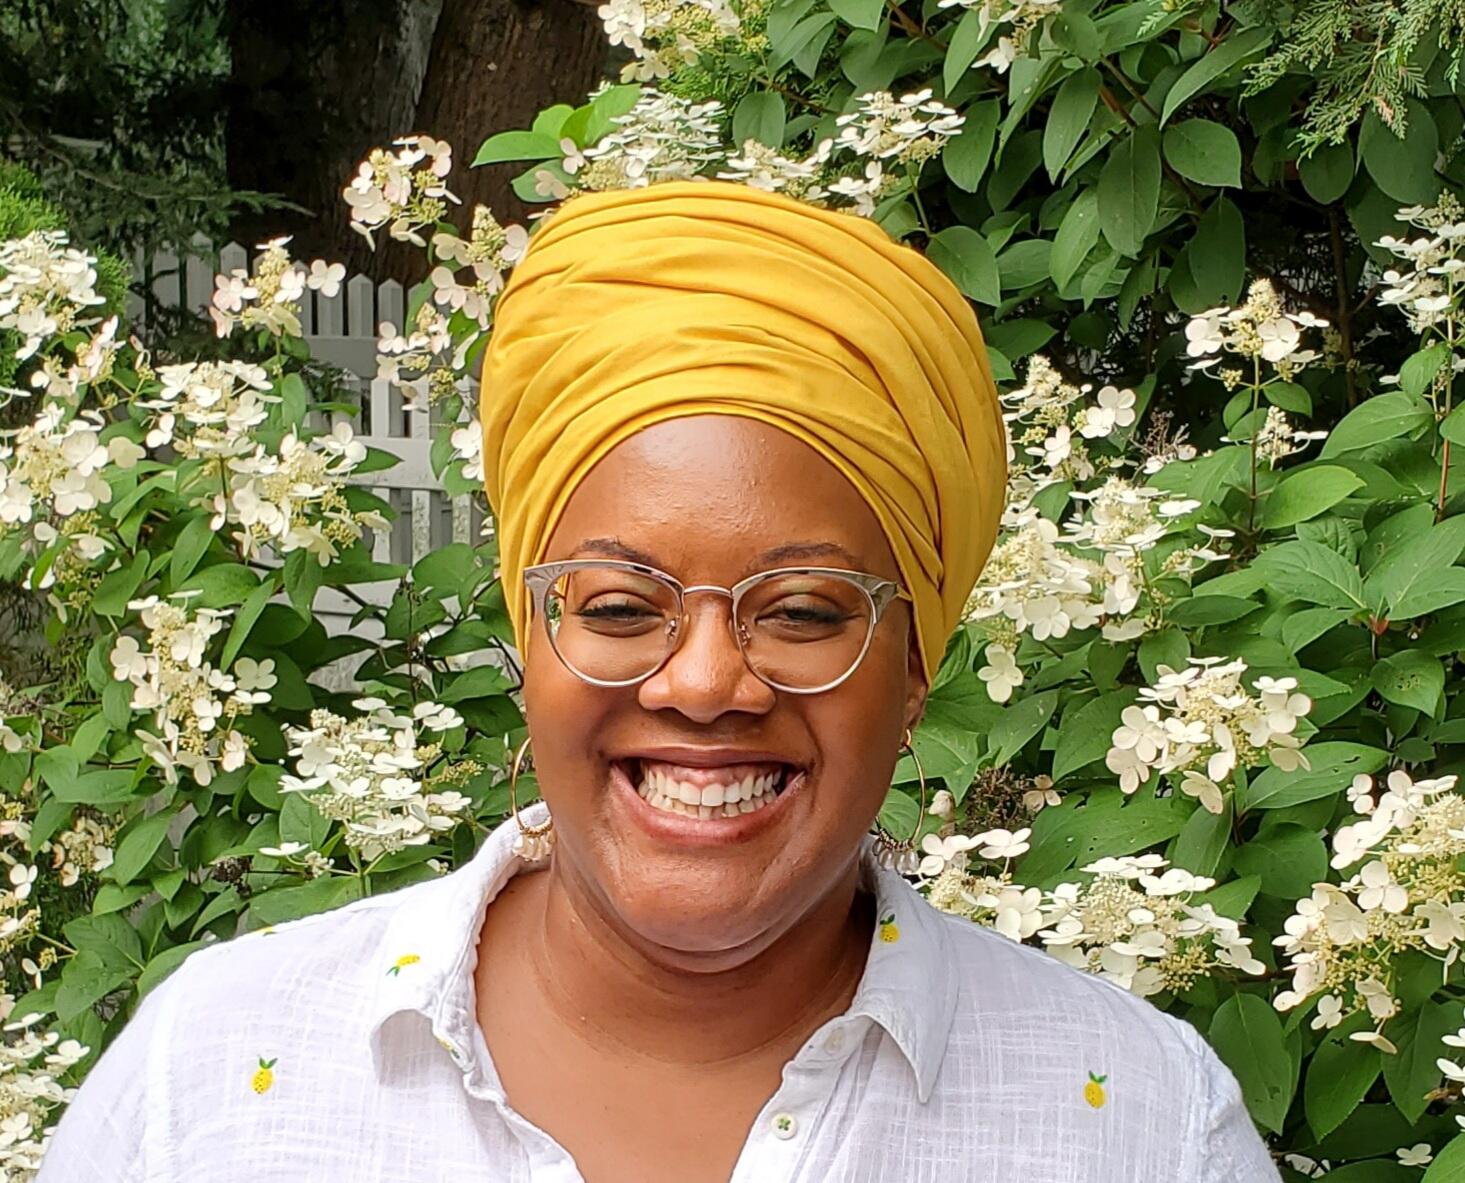 A woman wearing glasses, a white collared shirt with printed lemons, and a yellow head wrap.